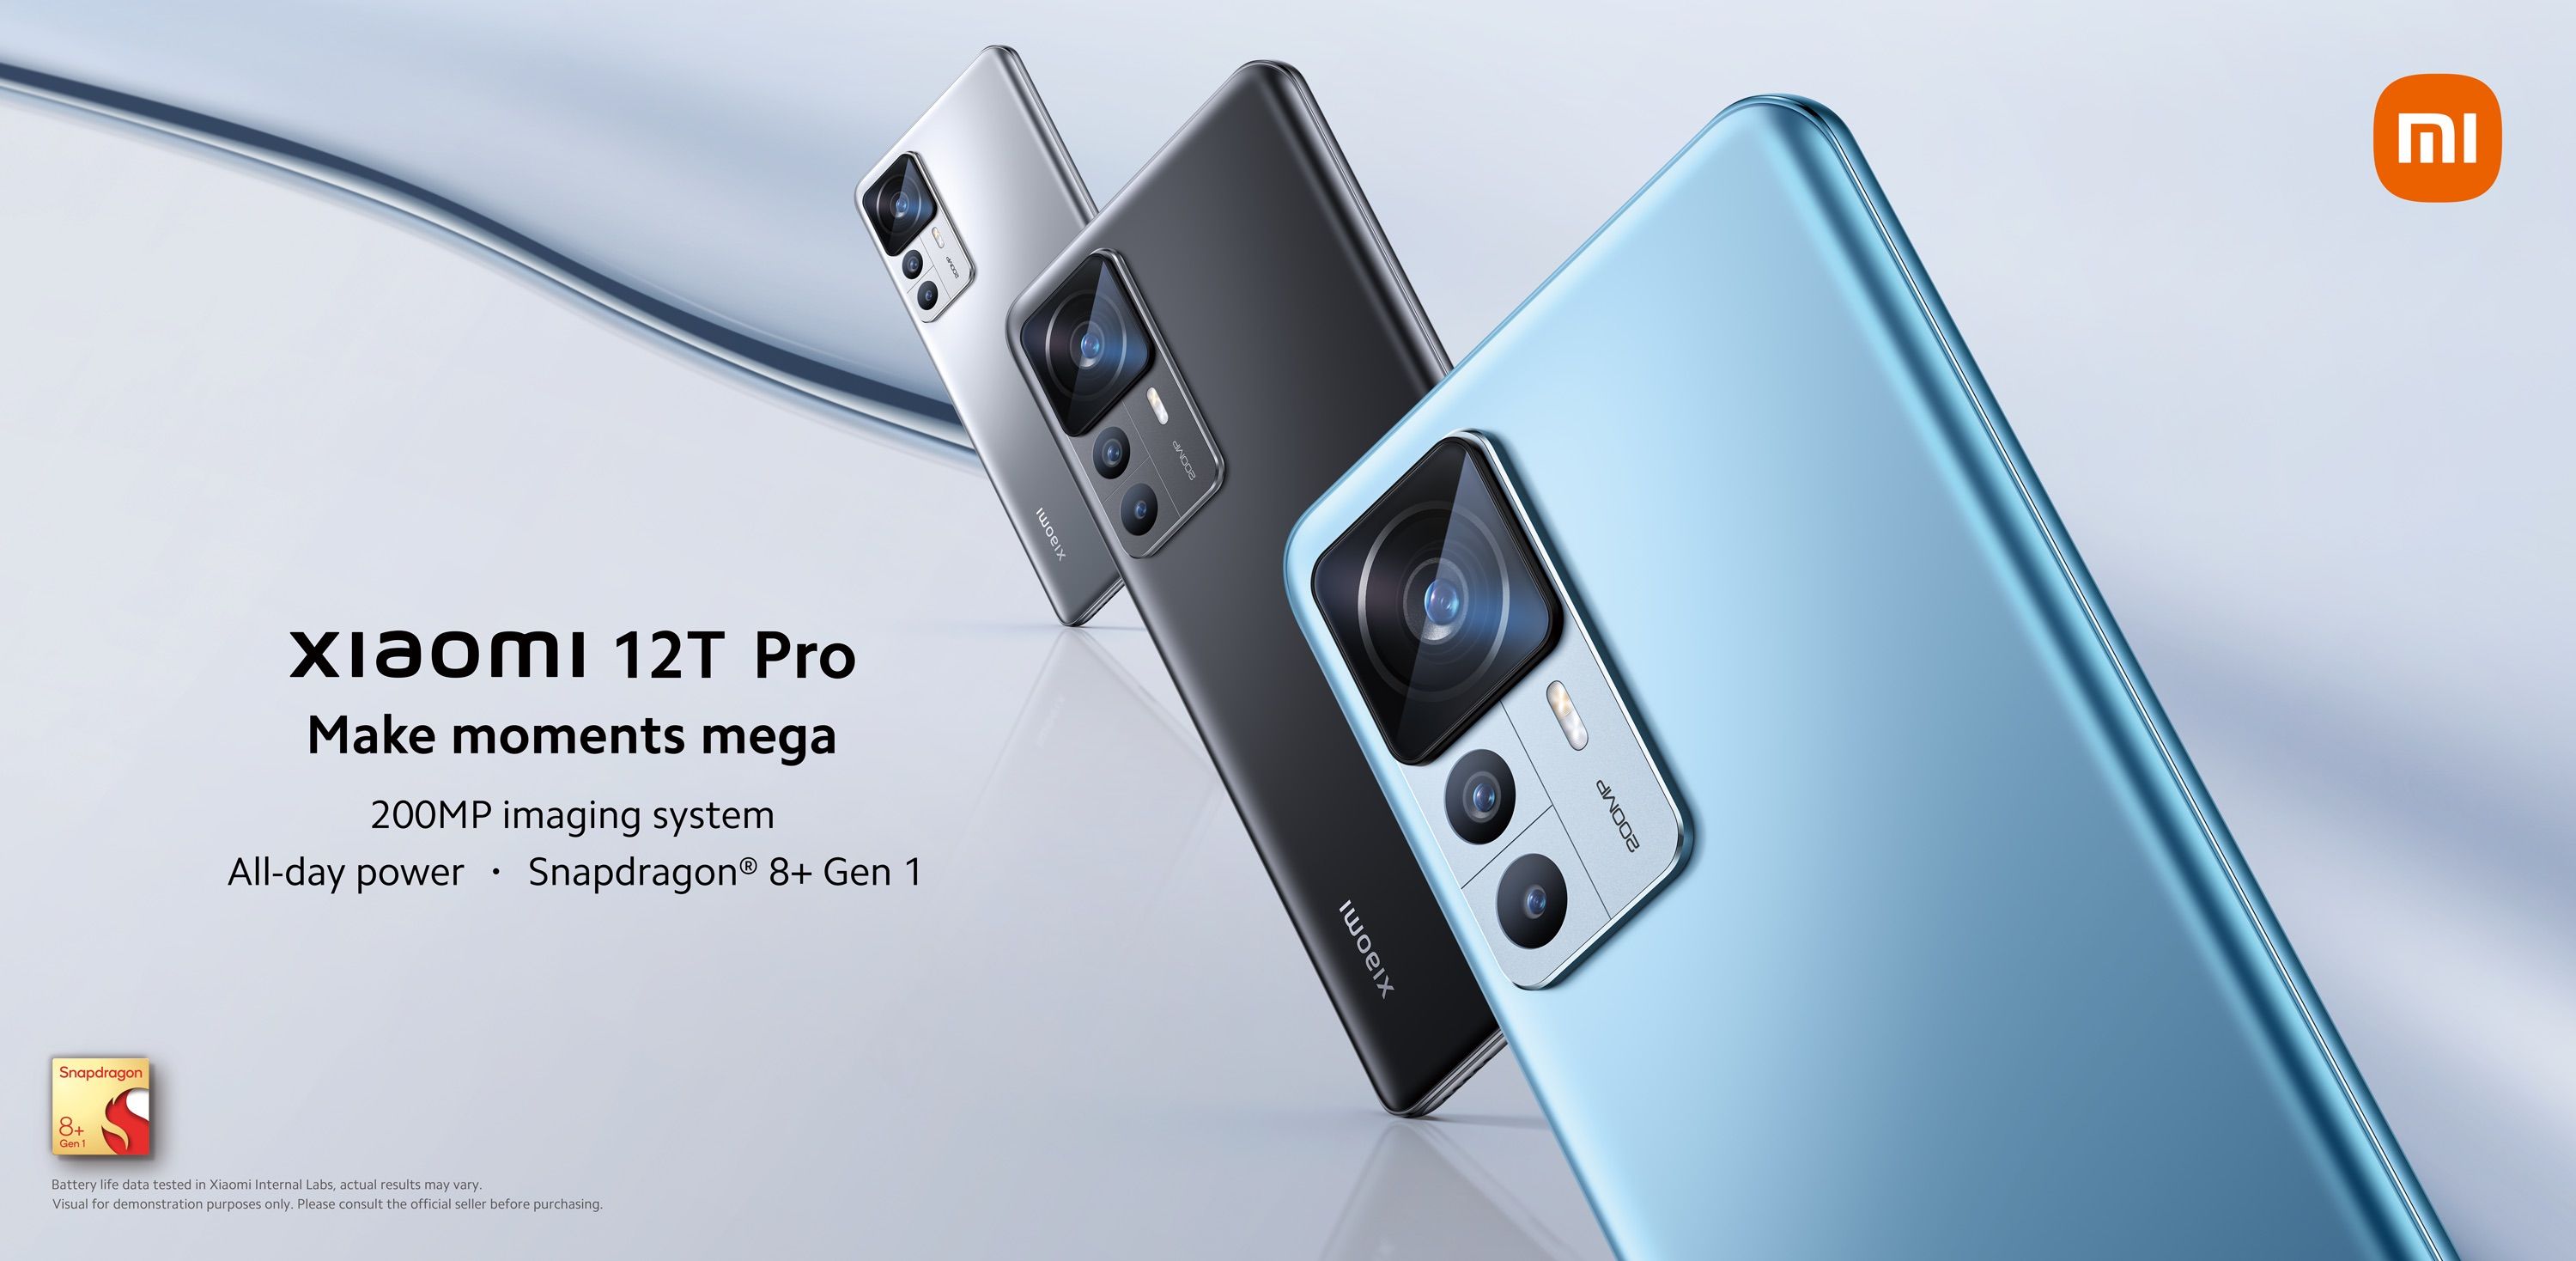 Xiaomi 12T Pro is the company's first 200MP camera phone